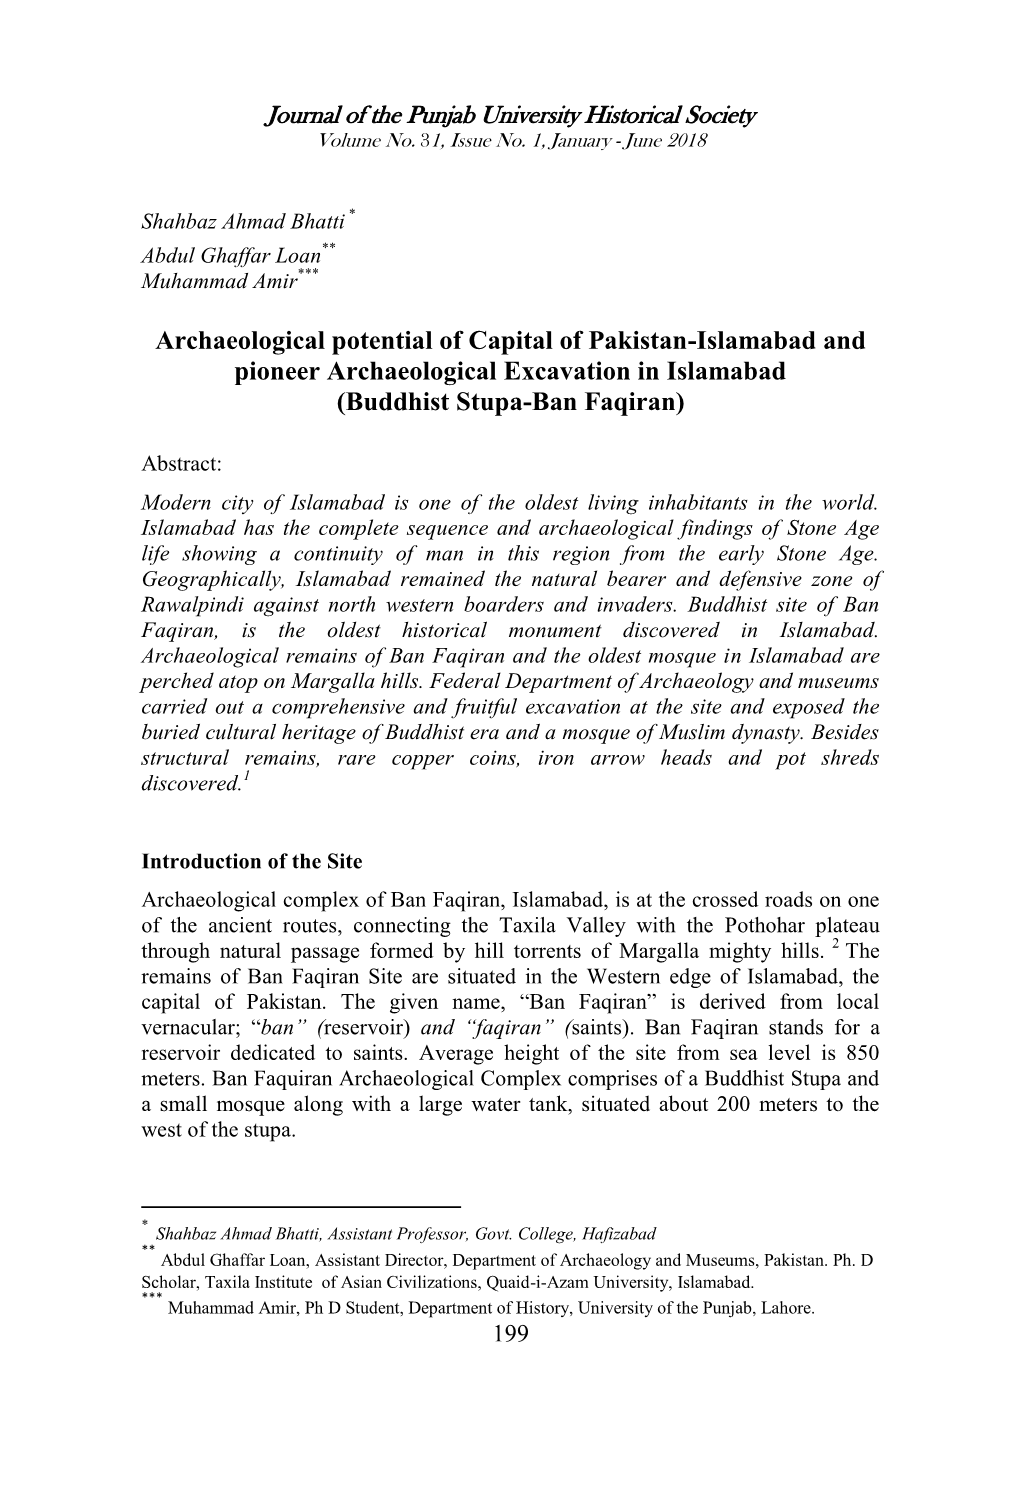 Archaeological Potential of Capital of Pakistan-Islamabad and Pioneer Archaeological Excavation in Islamabad (Buddhist Stupa-Ban Faqiran)